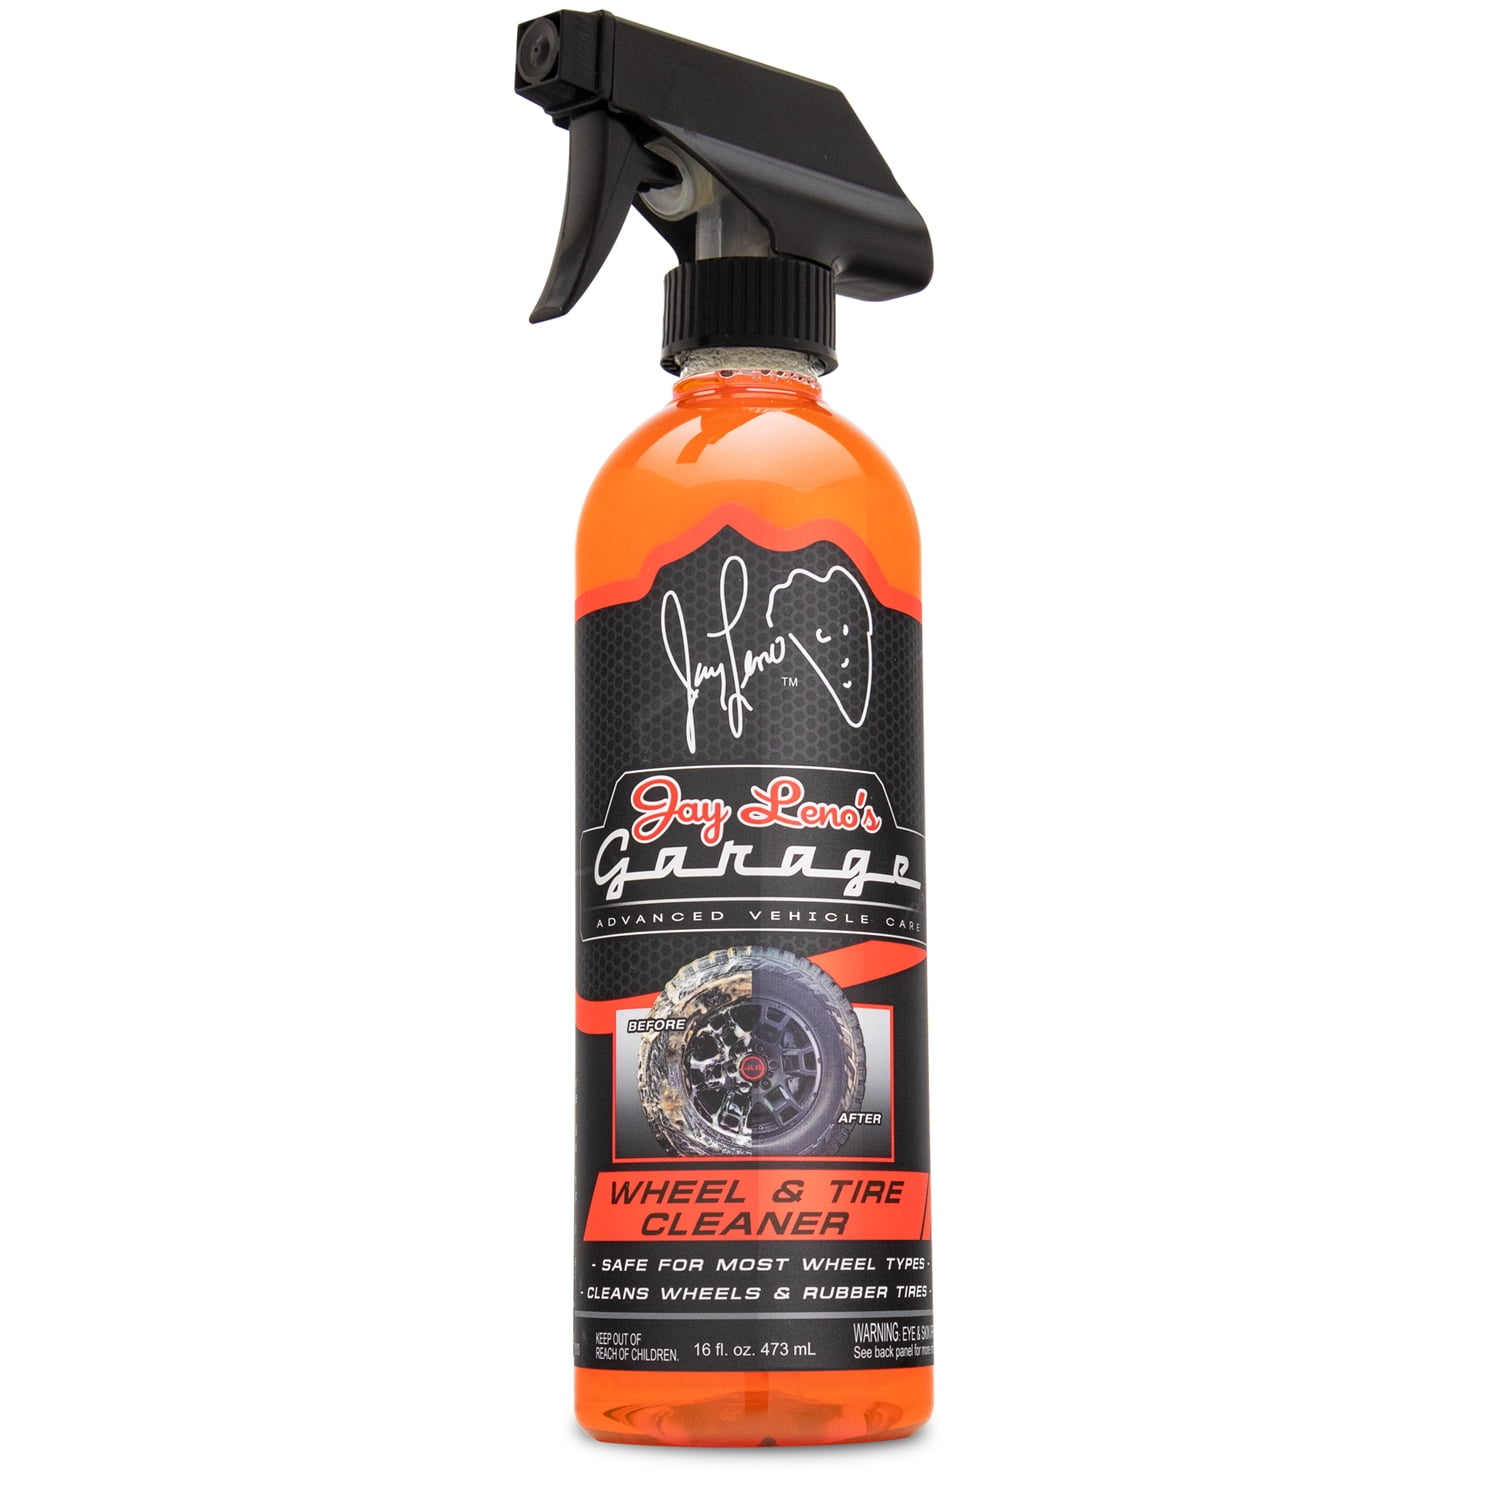 Stealth Garage Brake Bomber: Non-acid Wheel Cleaner, Perfect For Cleaning  Wheels And Tires, Rim Cleaner & Brake Dust Remover, Safe On Alloy, Chrome,  A